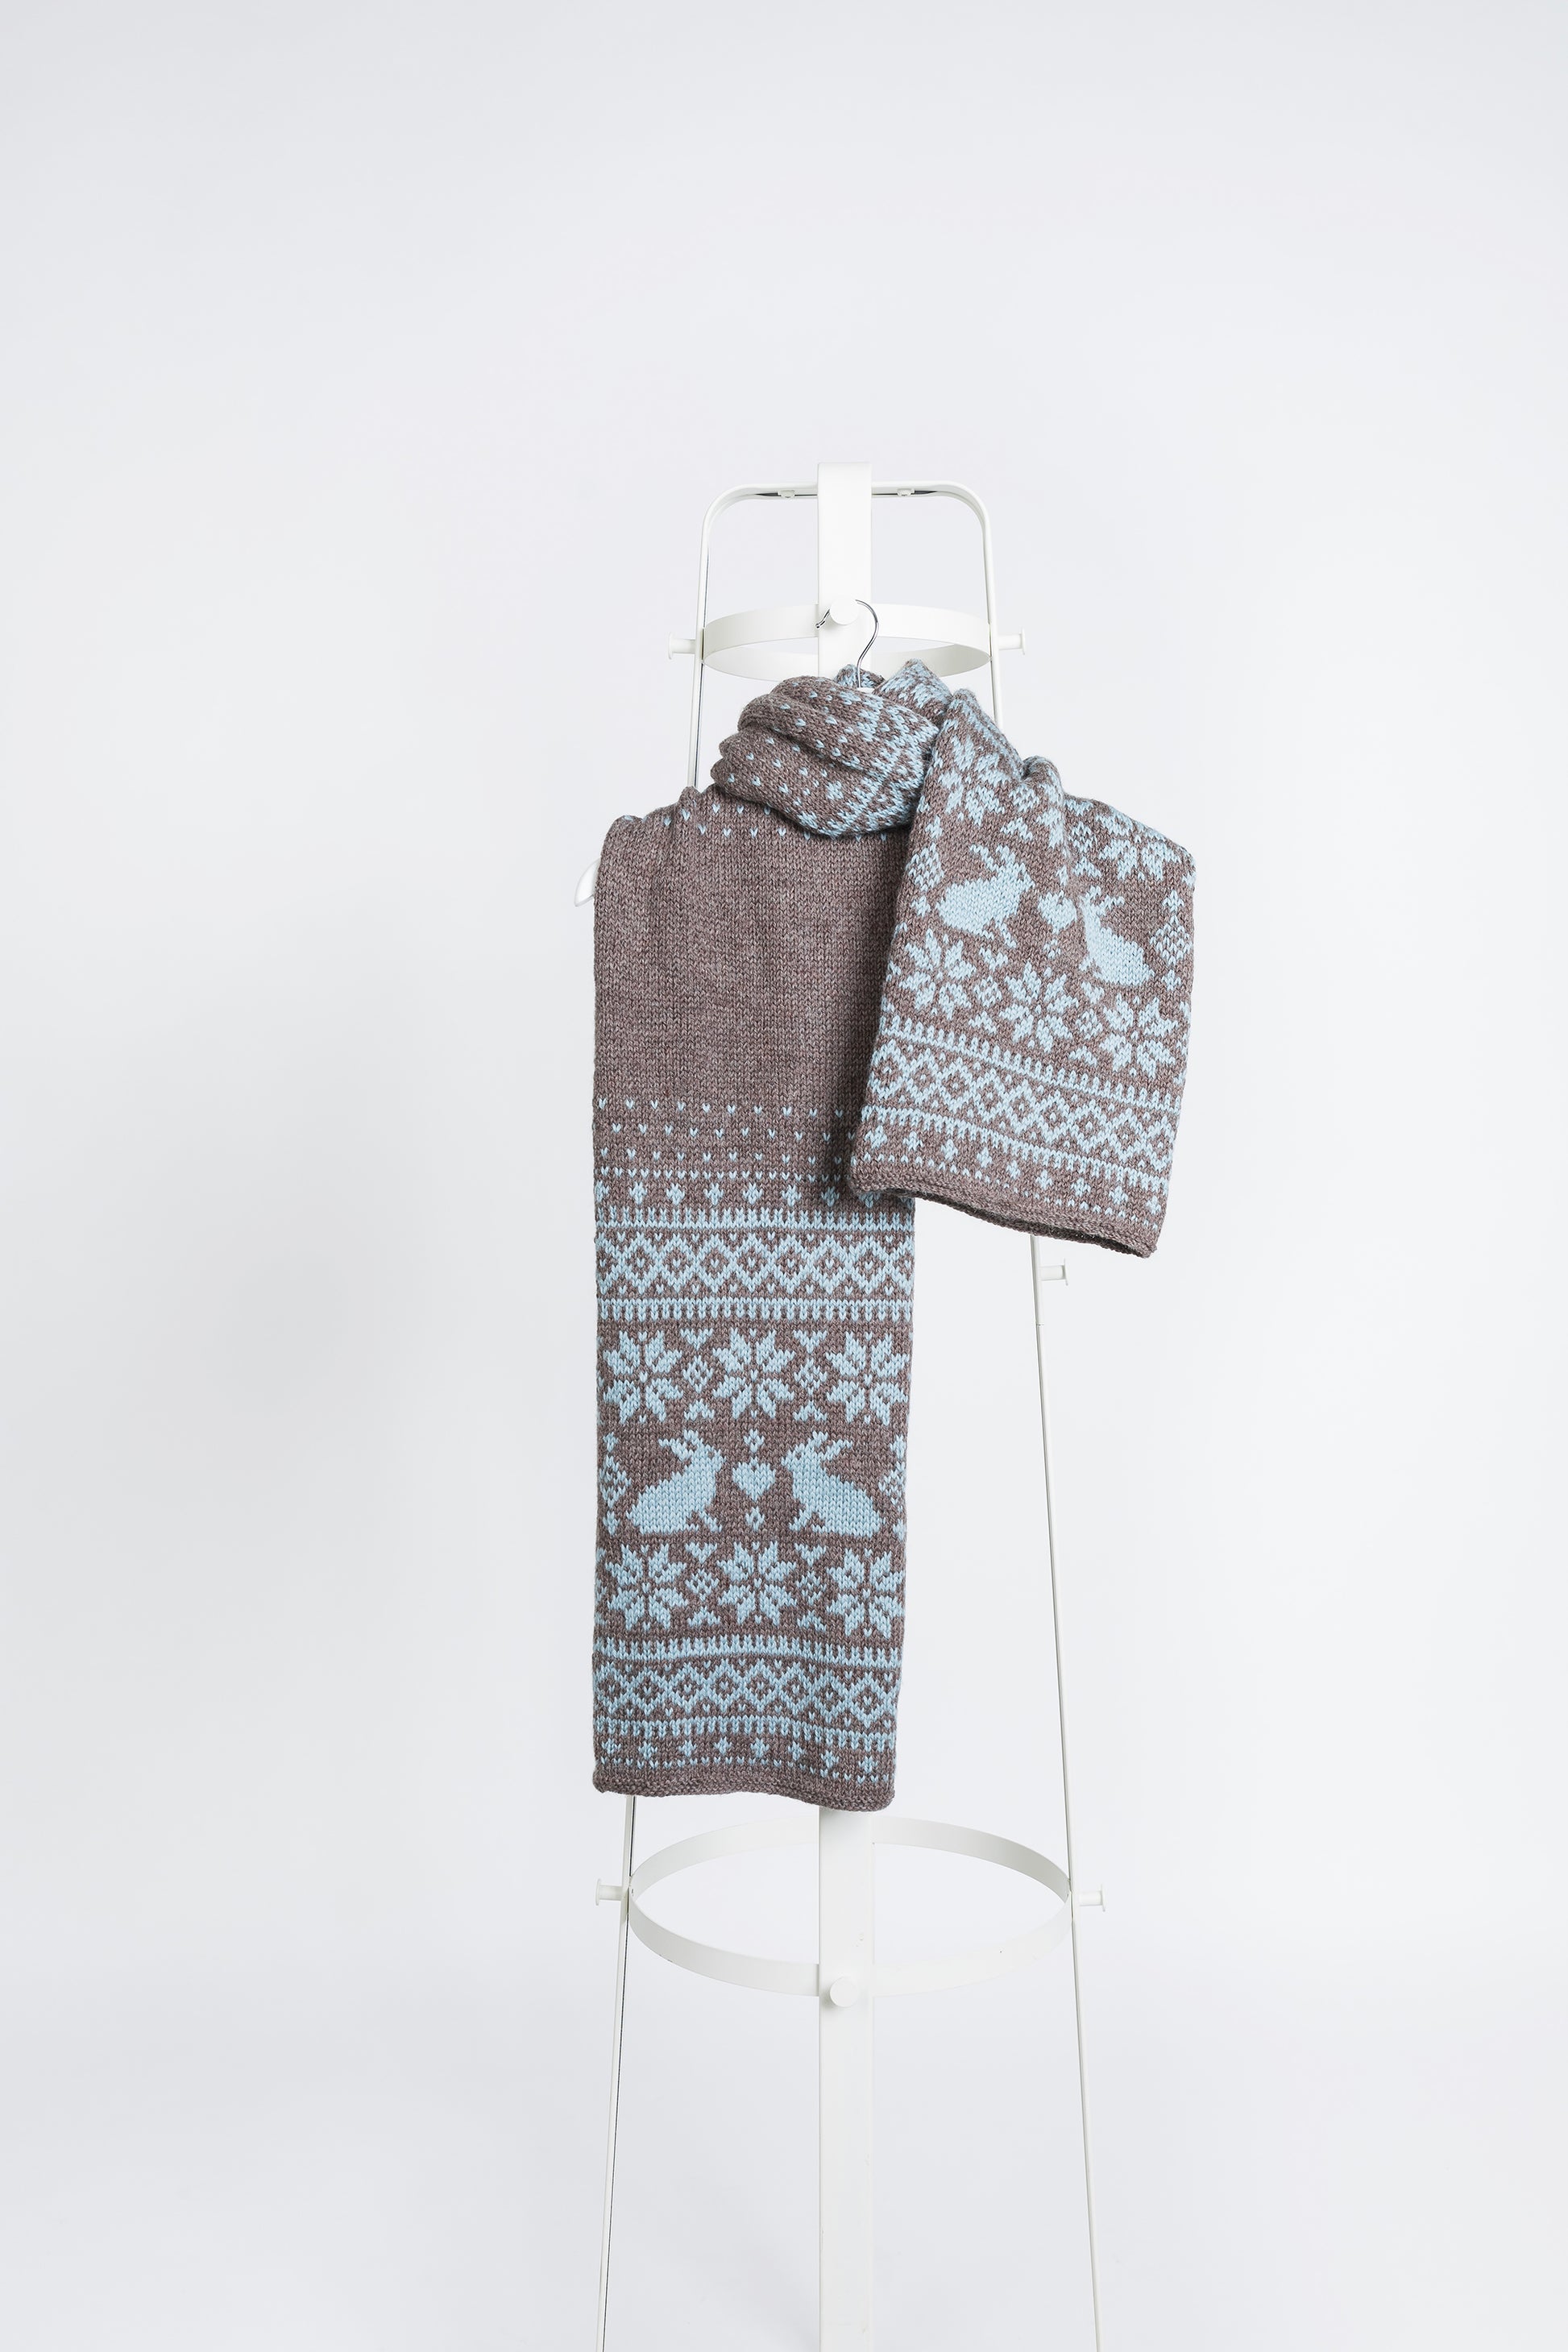 Long hand-knitted Fair Isle scarf made in Bunny Rabbits pattern made from grey blue and brown wool